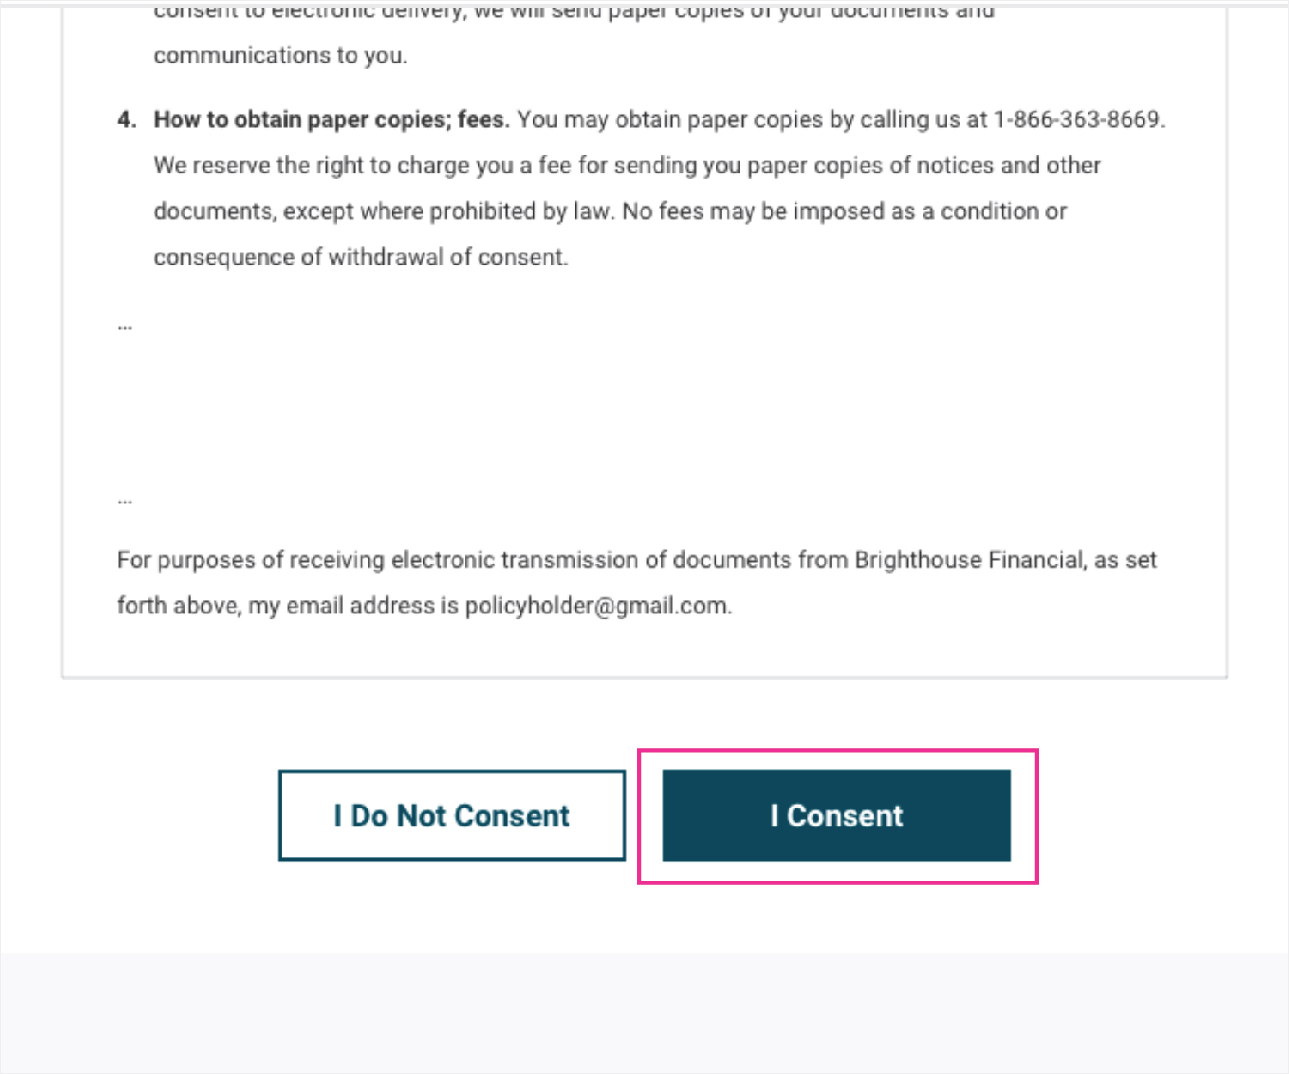 Step 6: Select Consent